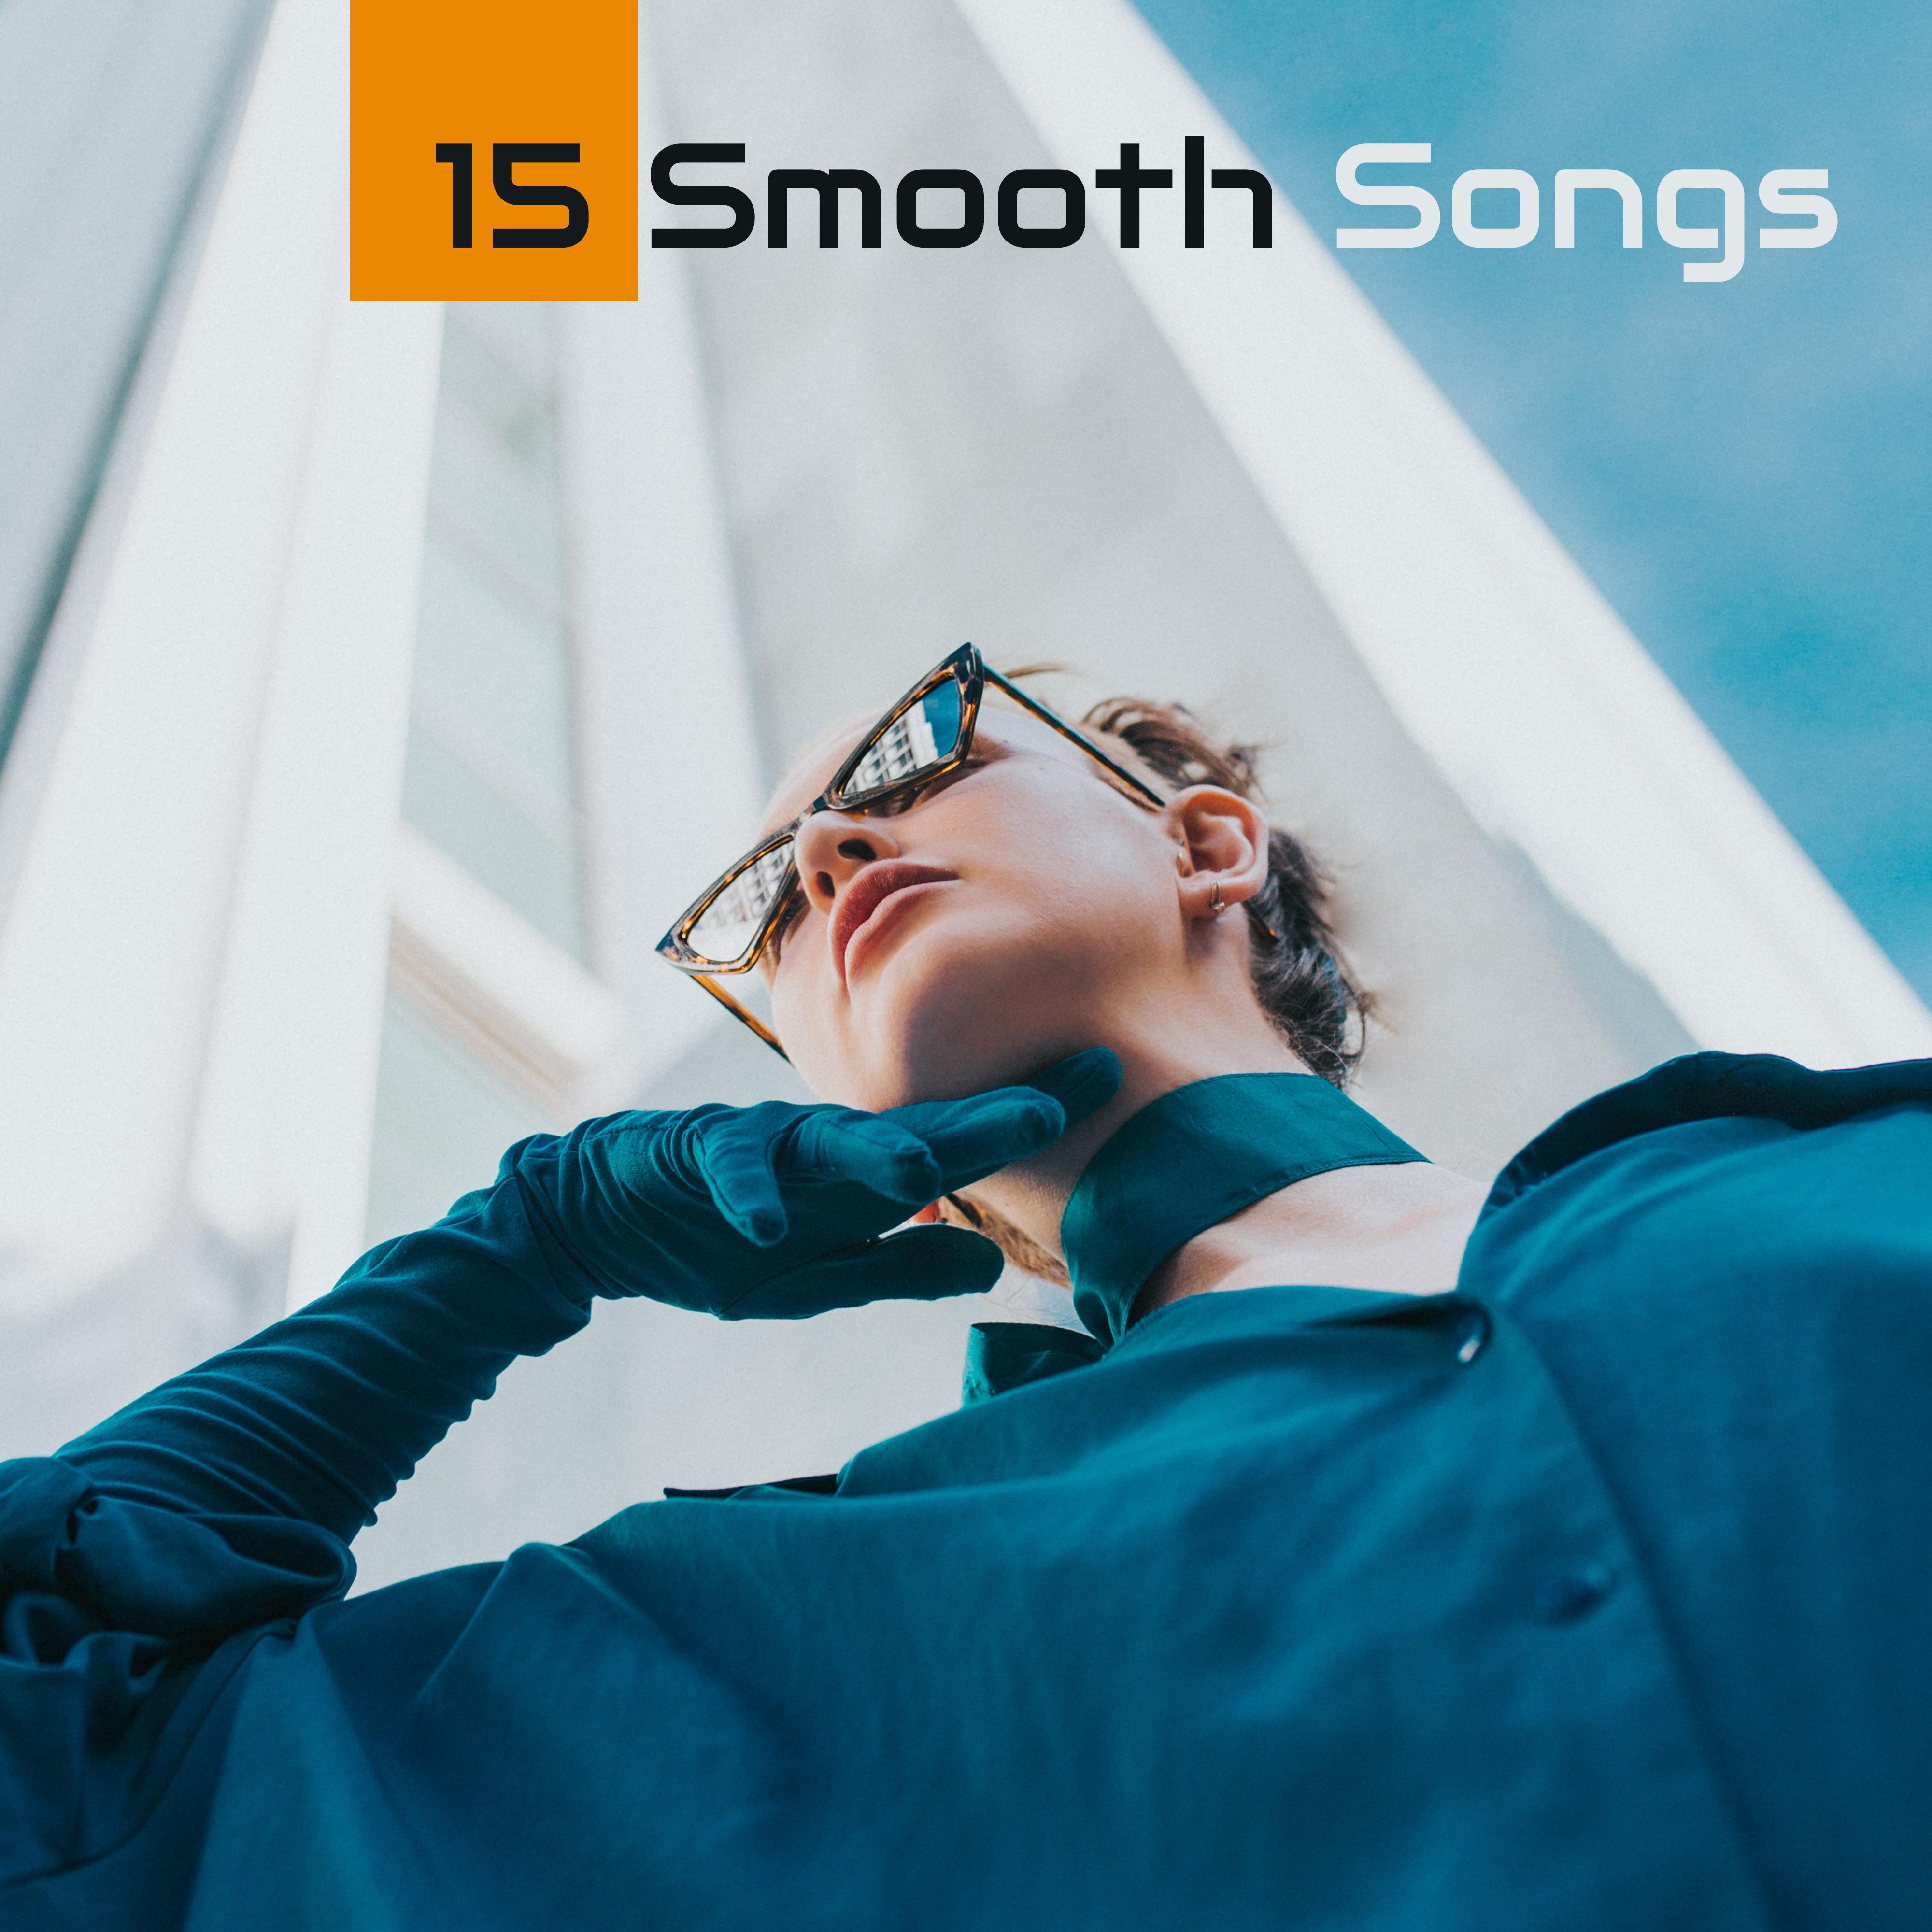 15 Smooth Songs: Slow, Relaxing and Gentle Instrumental Jazz